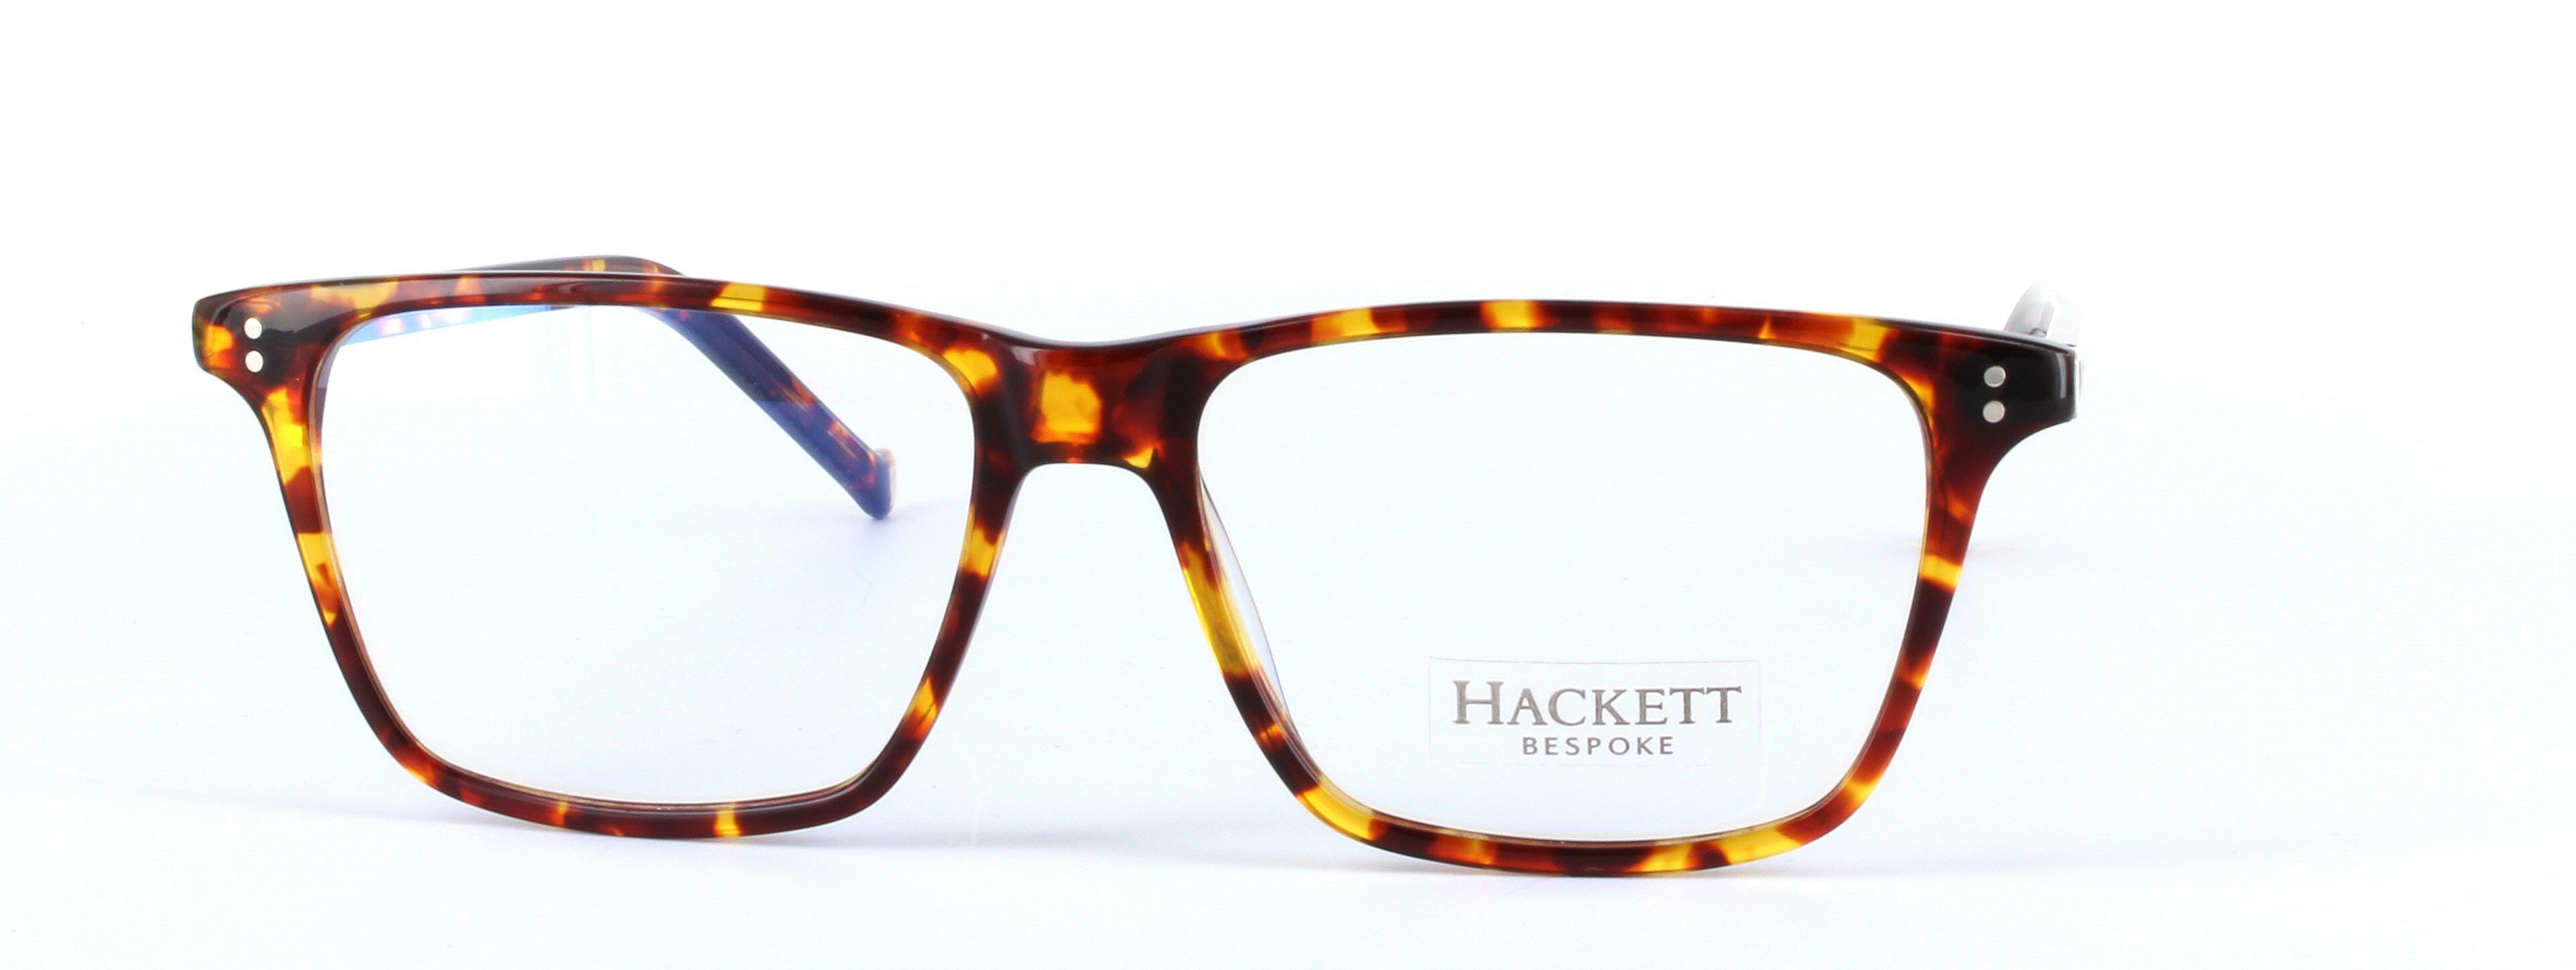 HACKETT BESPOKE (HEB143-127) Brown Full Rim Oval Round Square Acetate Glasses - Image View 4